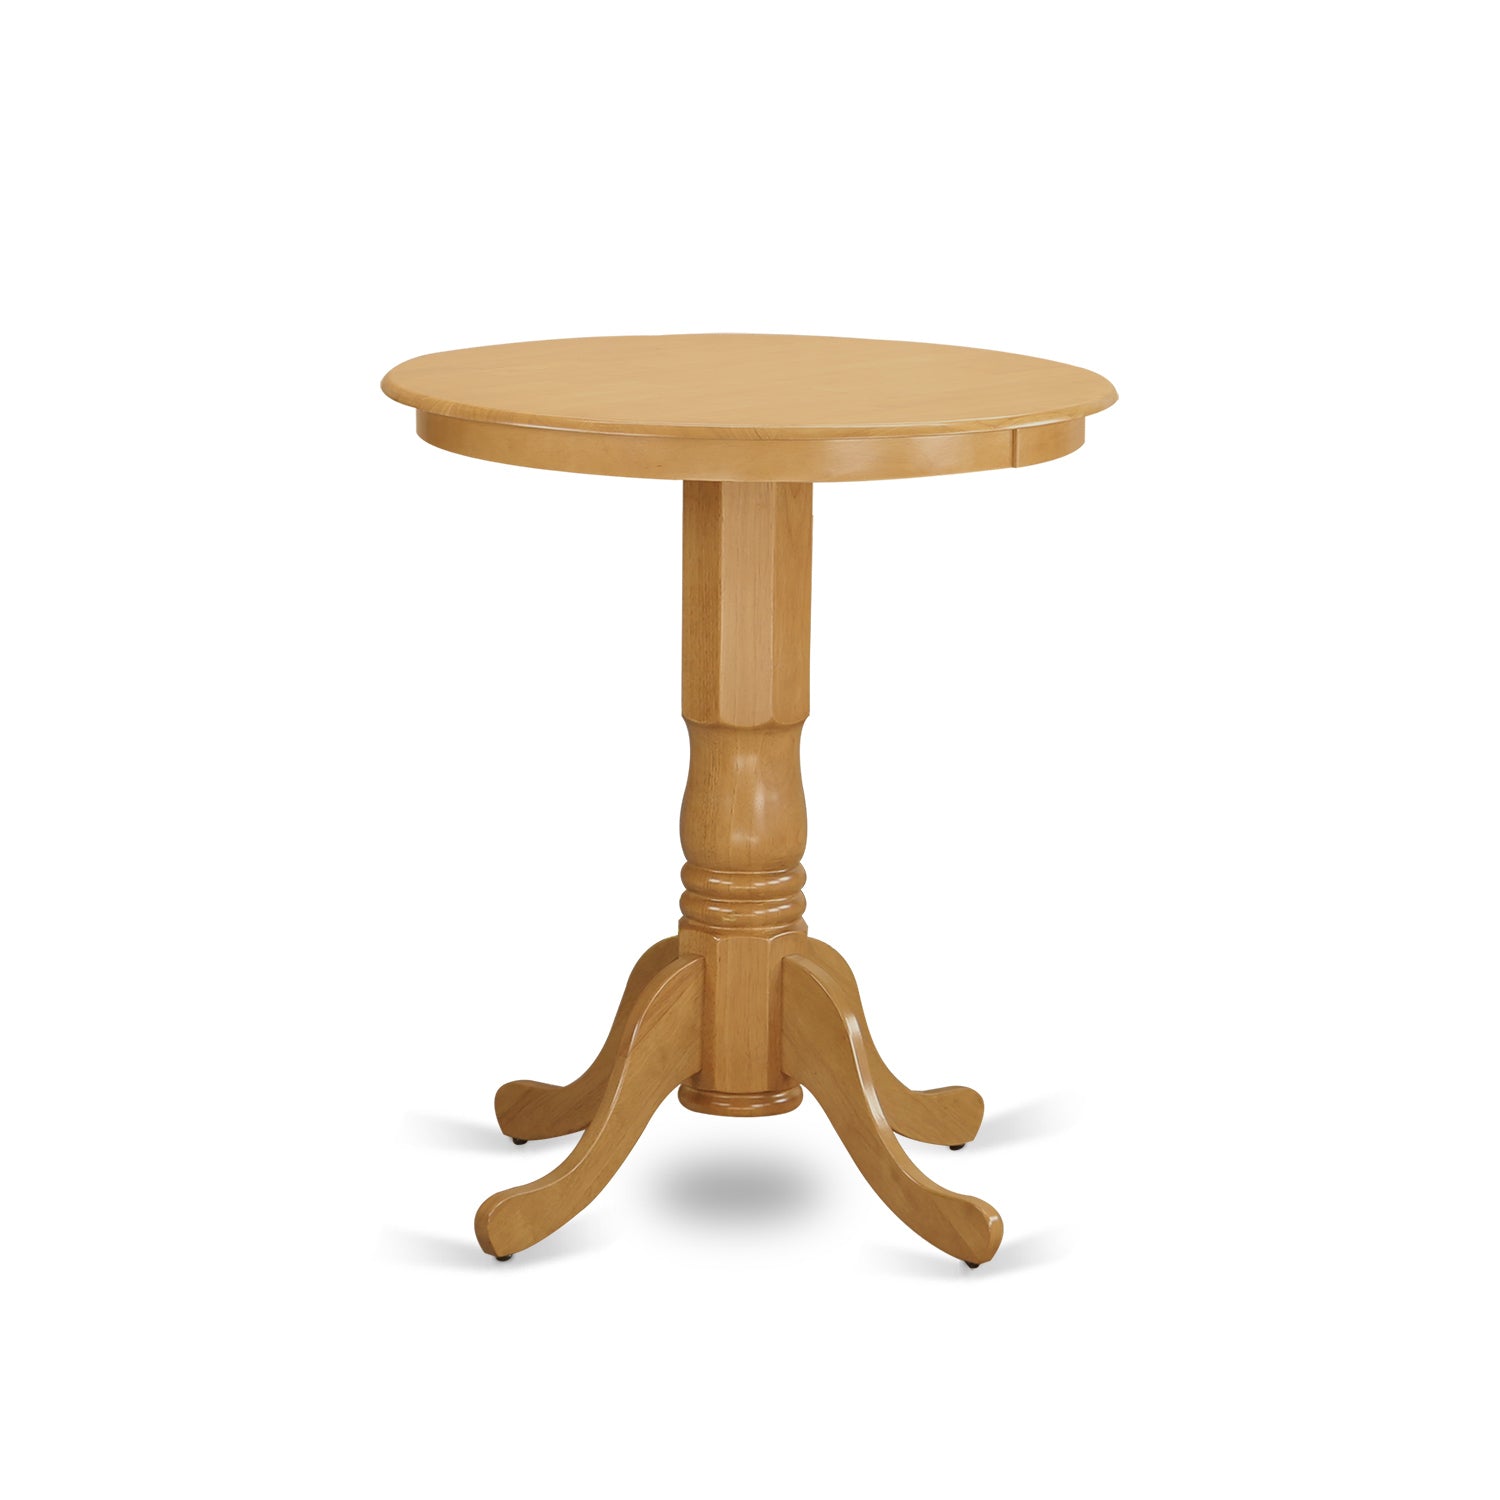 EDGR3-OAK-W 3 Pc Dining counter height set - high top Table and 2 dinette Chairs.